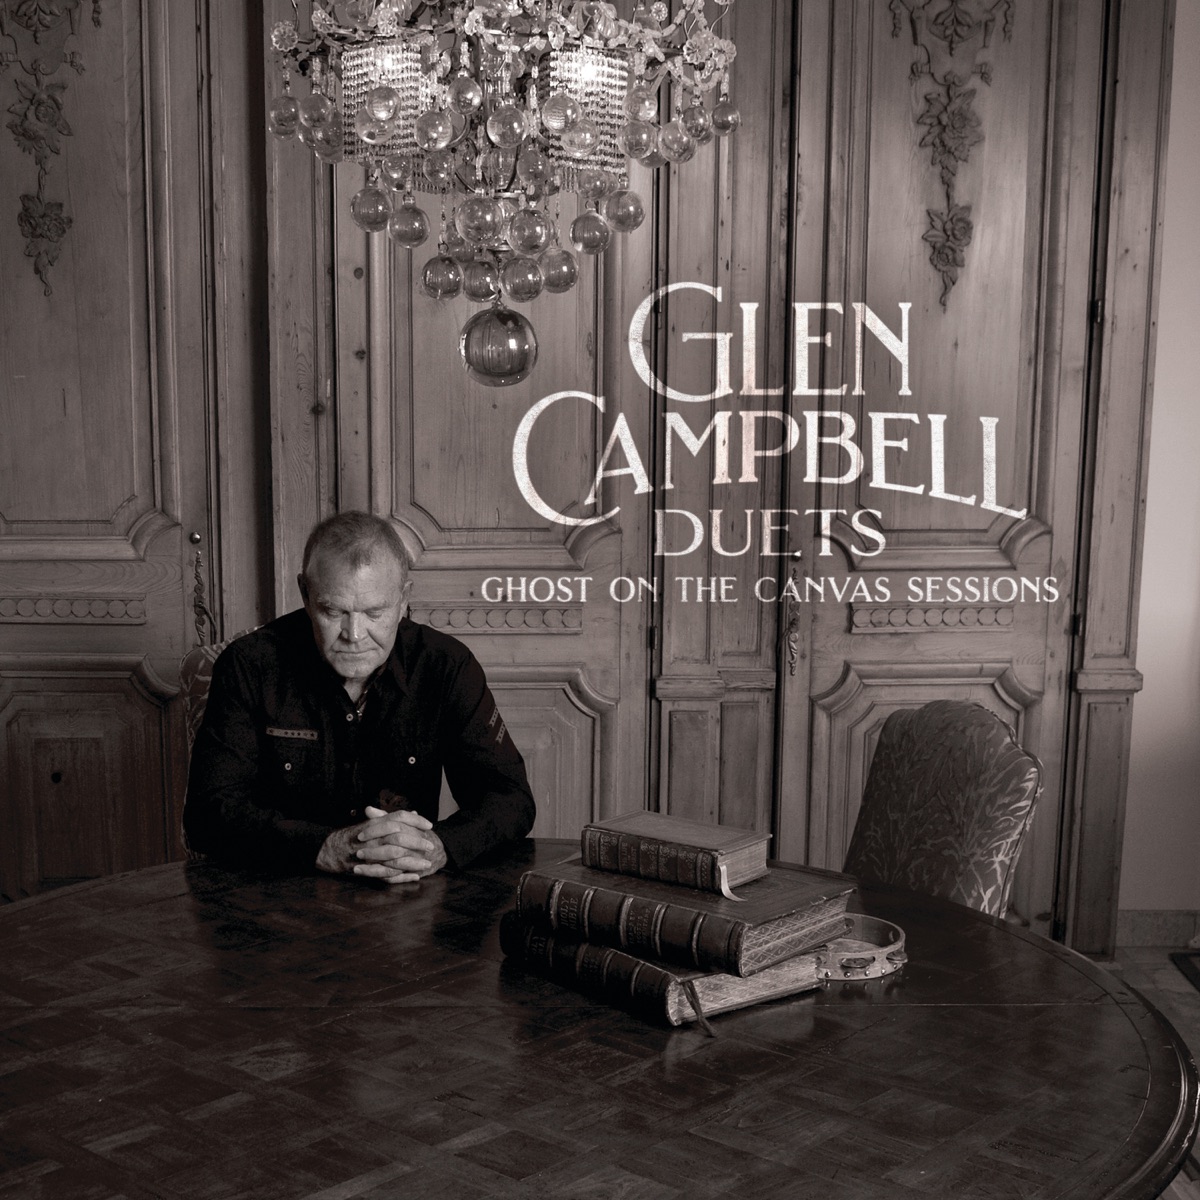 Glen Campbell - Glen Campbell Duets: Ghost On The Canvas Sessions 1